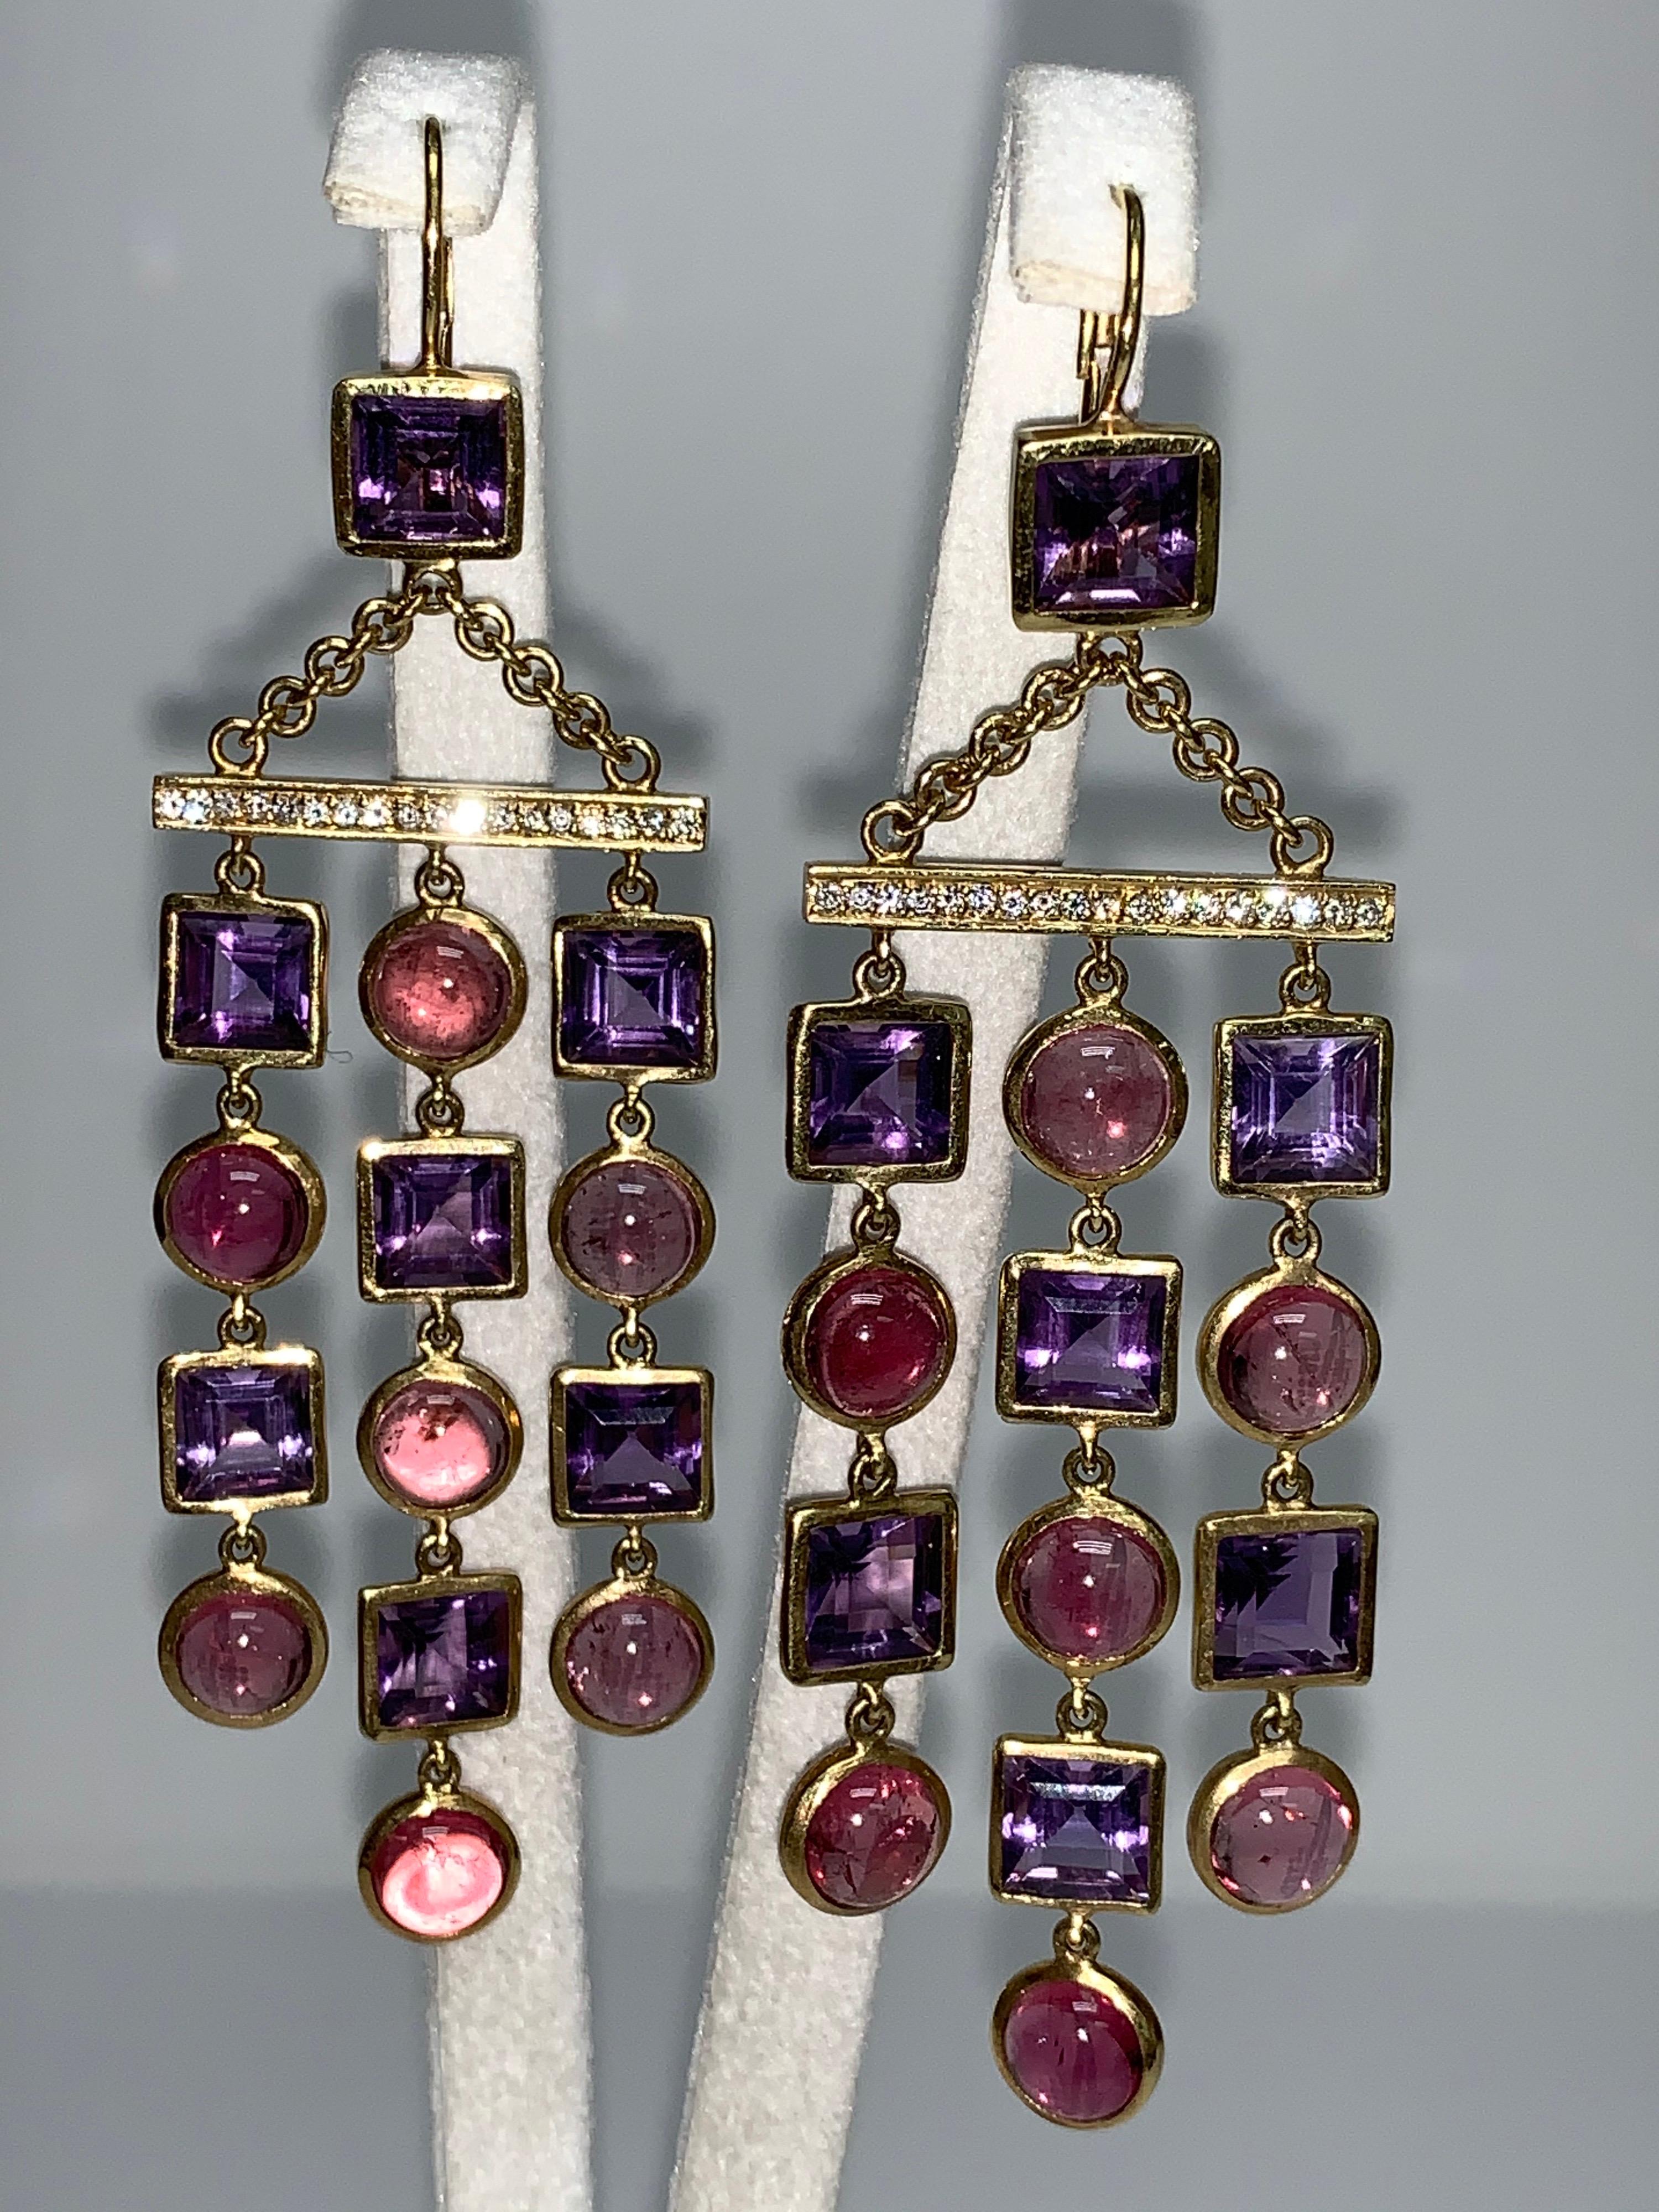 Amethyst & Pink Tourmaline, Yellow Gold Chandelier Earrings, Art Deco style. 

Featuring an exquisite pair of Amethyst & Pink Tourmaline Stones with a total weight of 44.24 carats; accented White Pavé Diamonds with a total weight of 0.35 carats, set